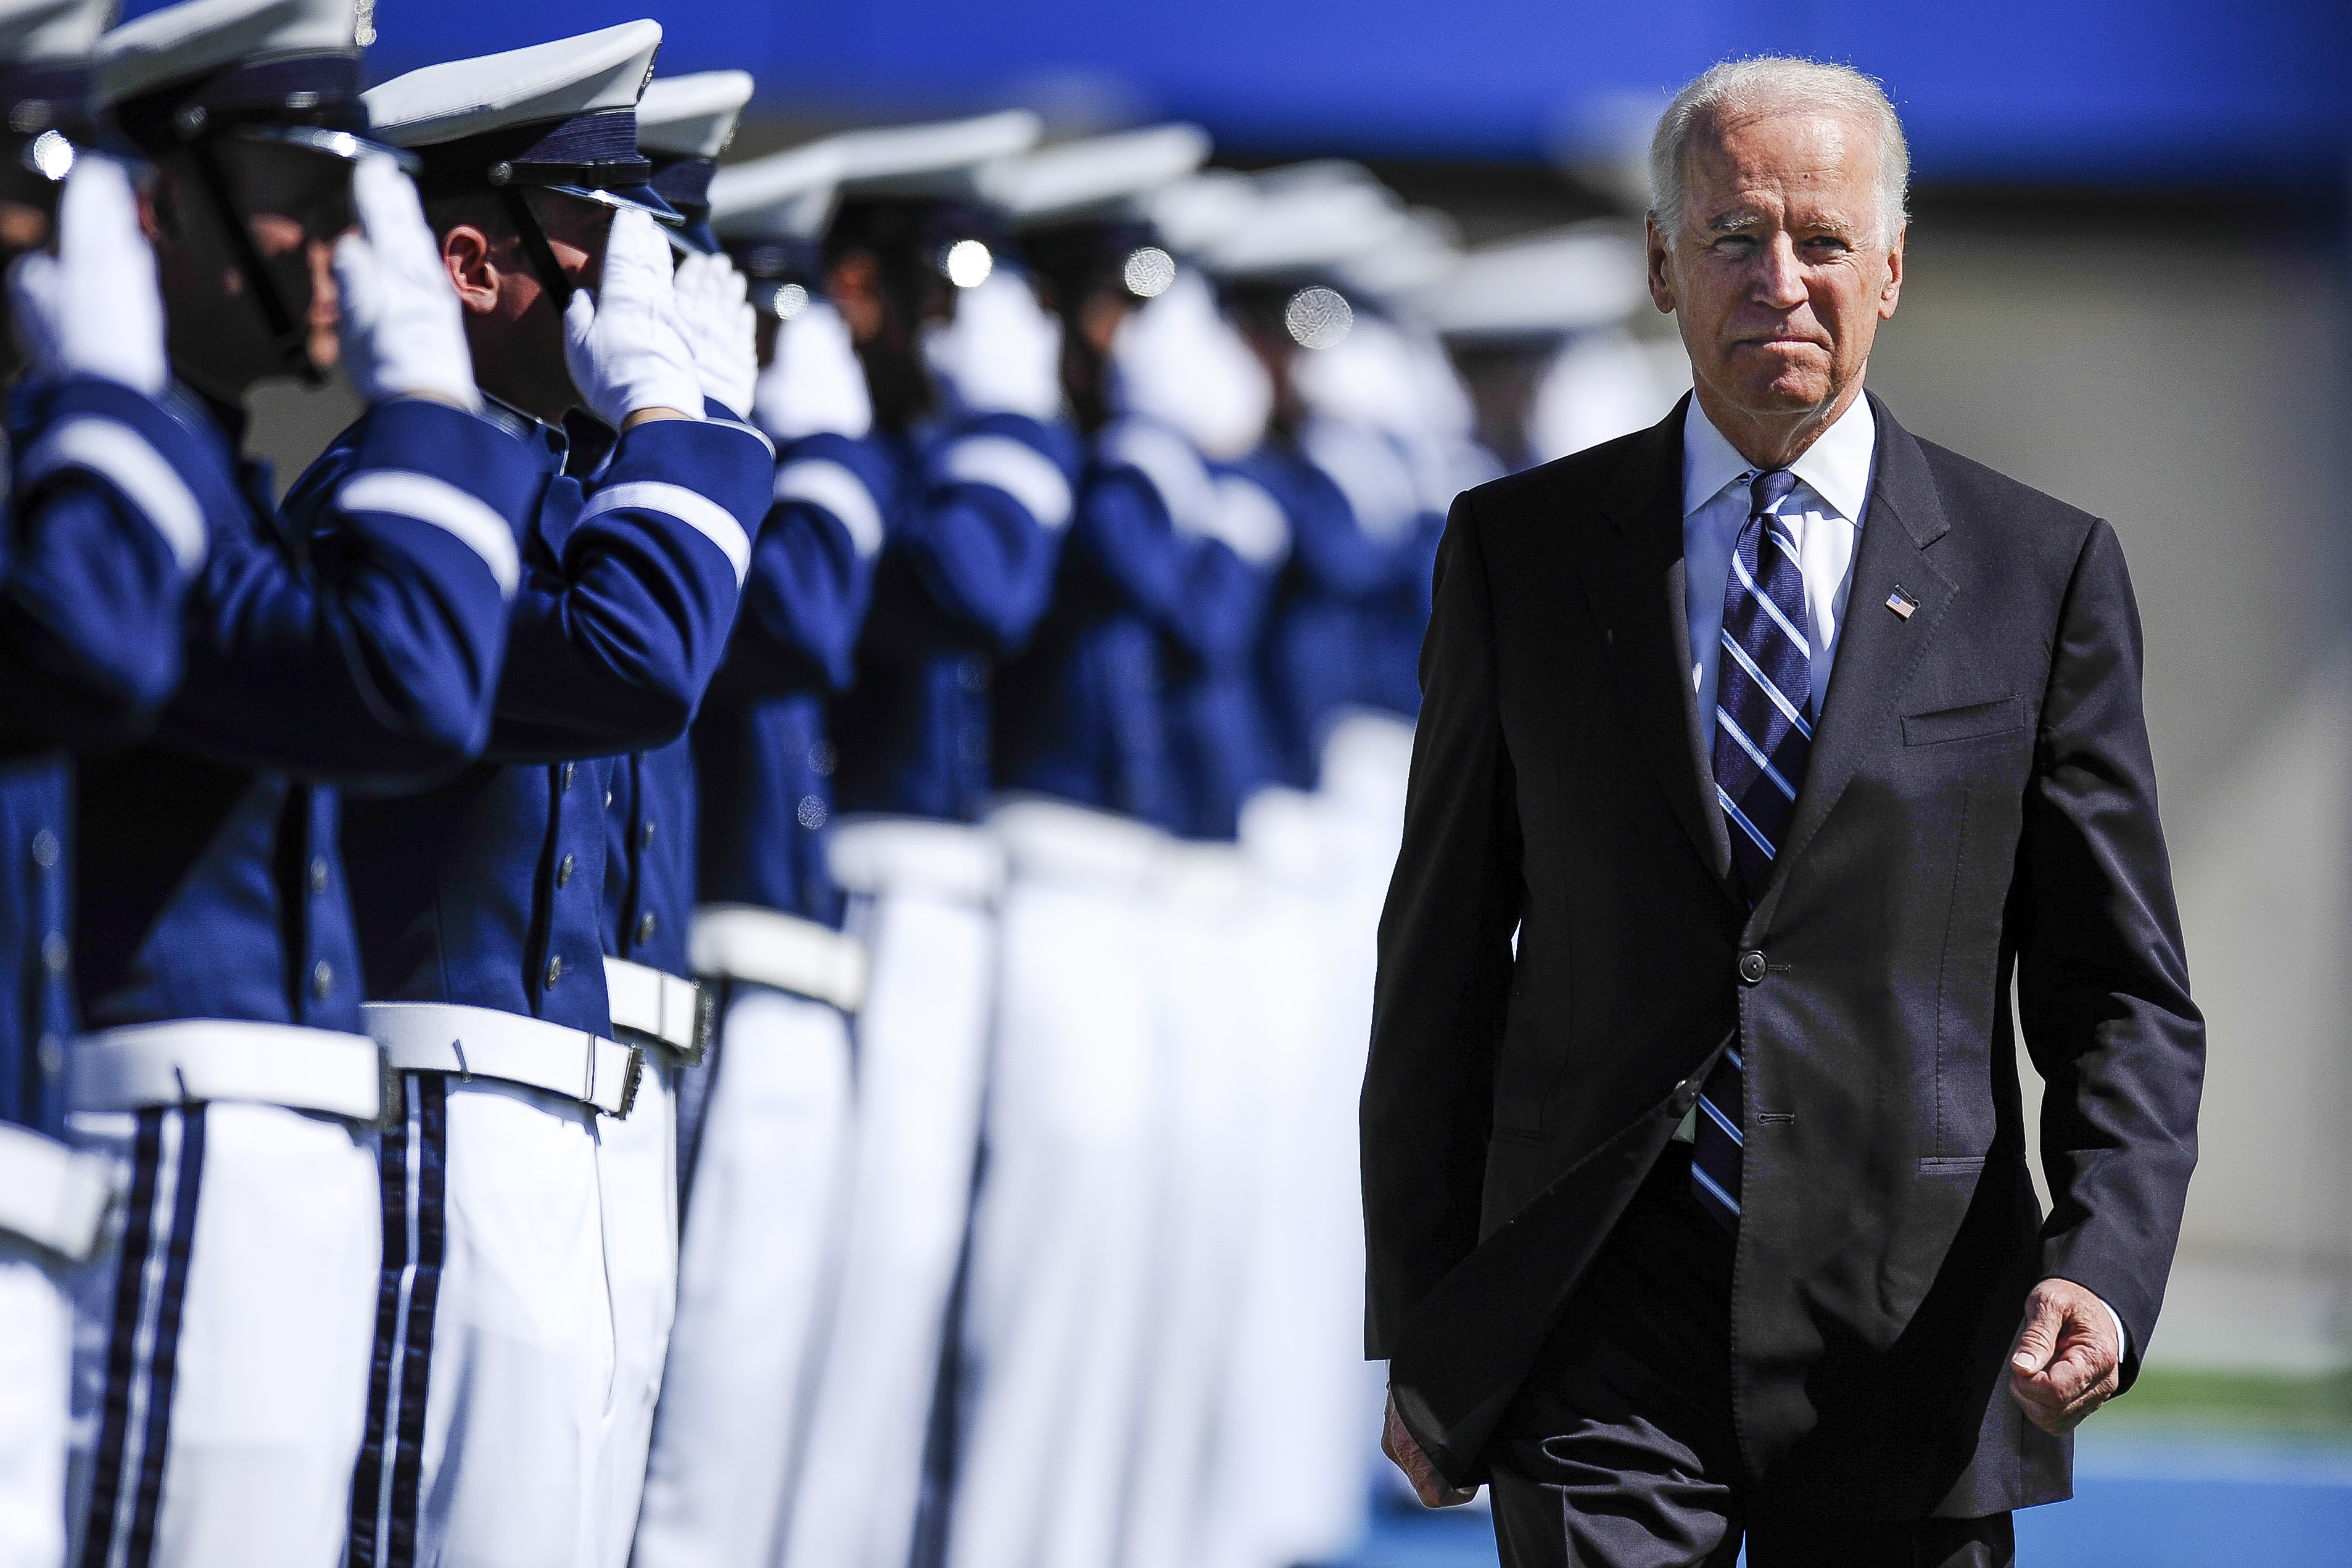 Vice President Joe Biden walks to the stage during the graduation ceremony for the United States Air Force Academy class of 2014 at Falcon Stadium in Colorado Springs, Colo. on May 28, 2014. (Michael Ciaglo—AP)